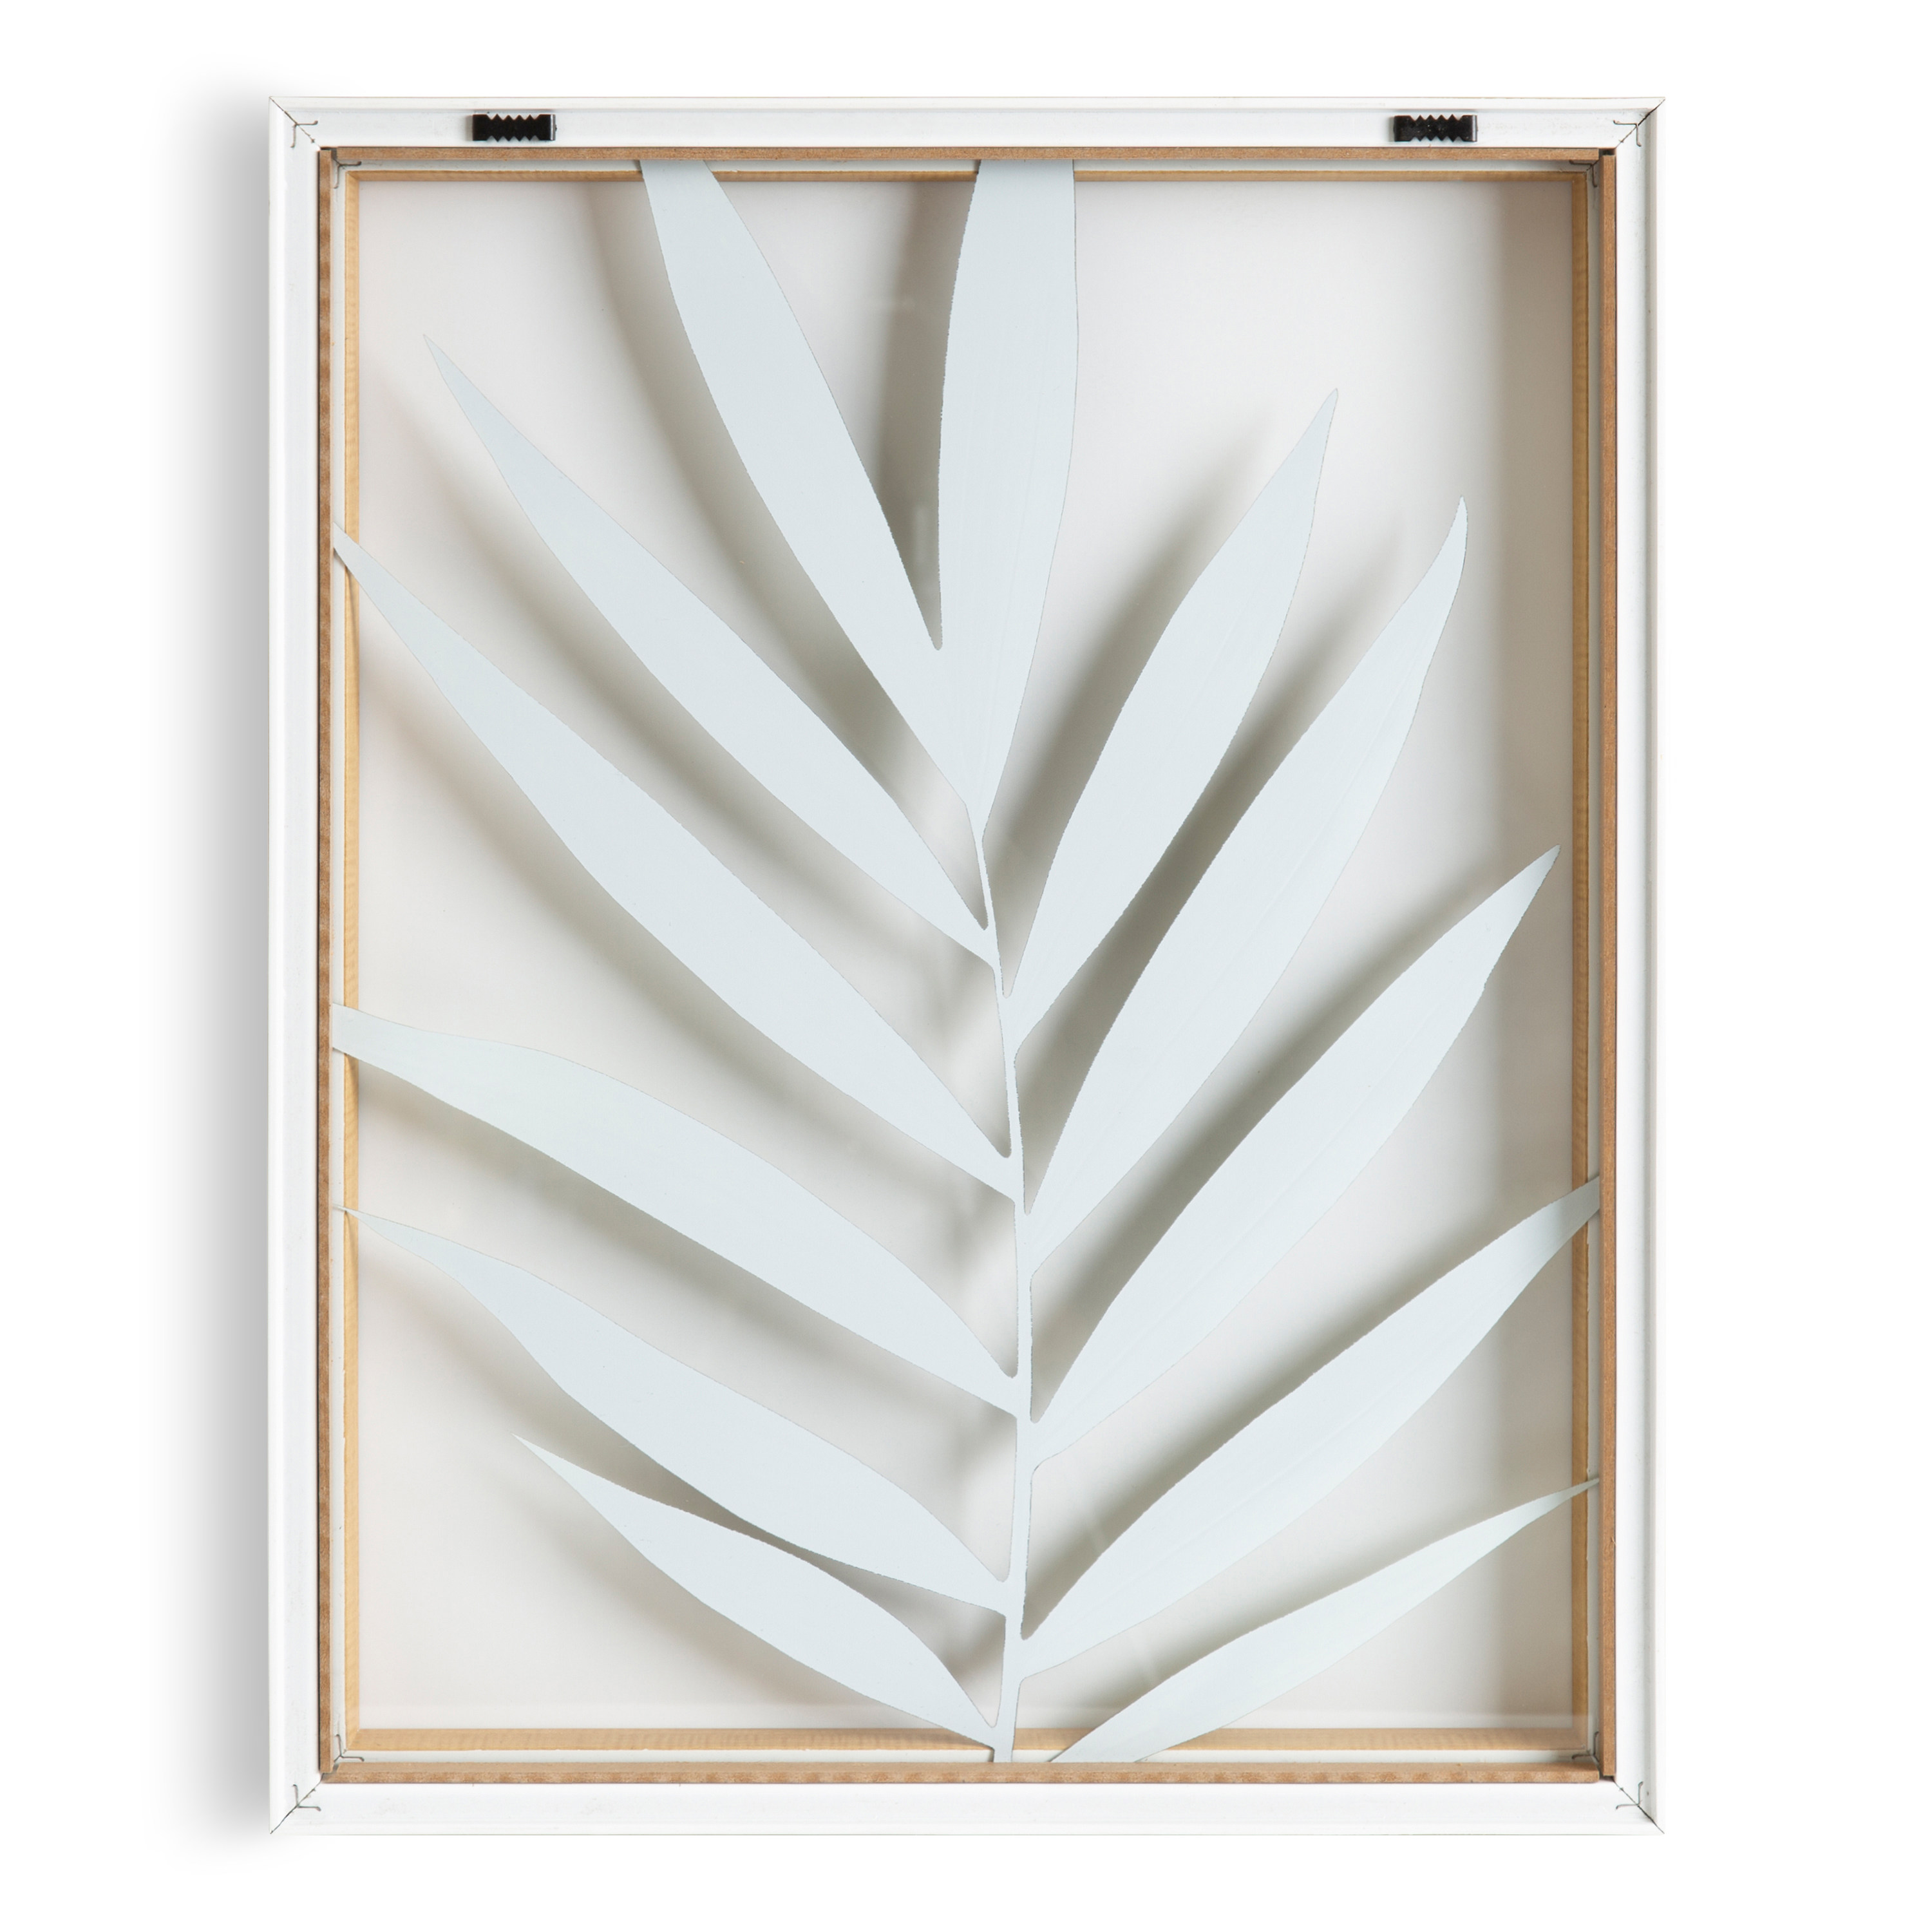 Kate and Laurel Blake Botanical 5F Framed Printed Glass Wall Art by Amy  Peterson Art Studio, 16x20 Natural, Modern Wall Decor Inspired by Nature 